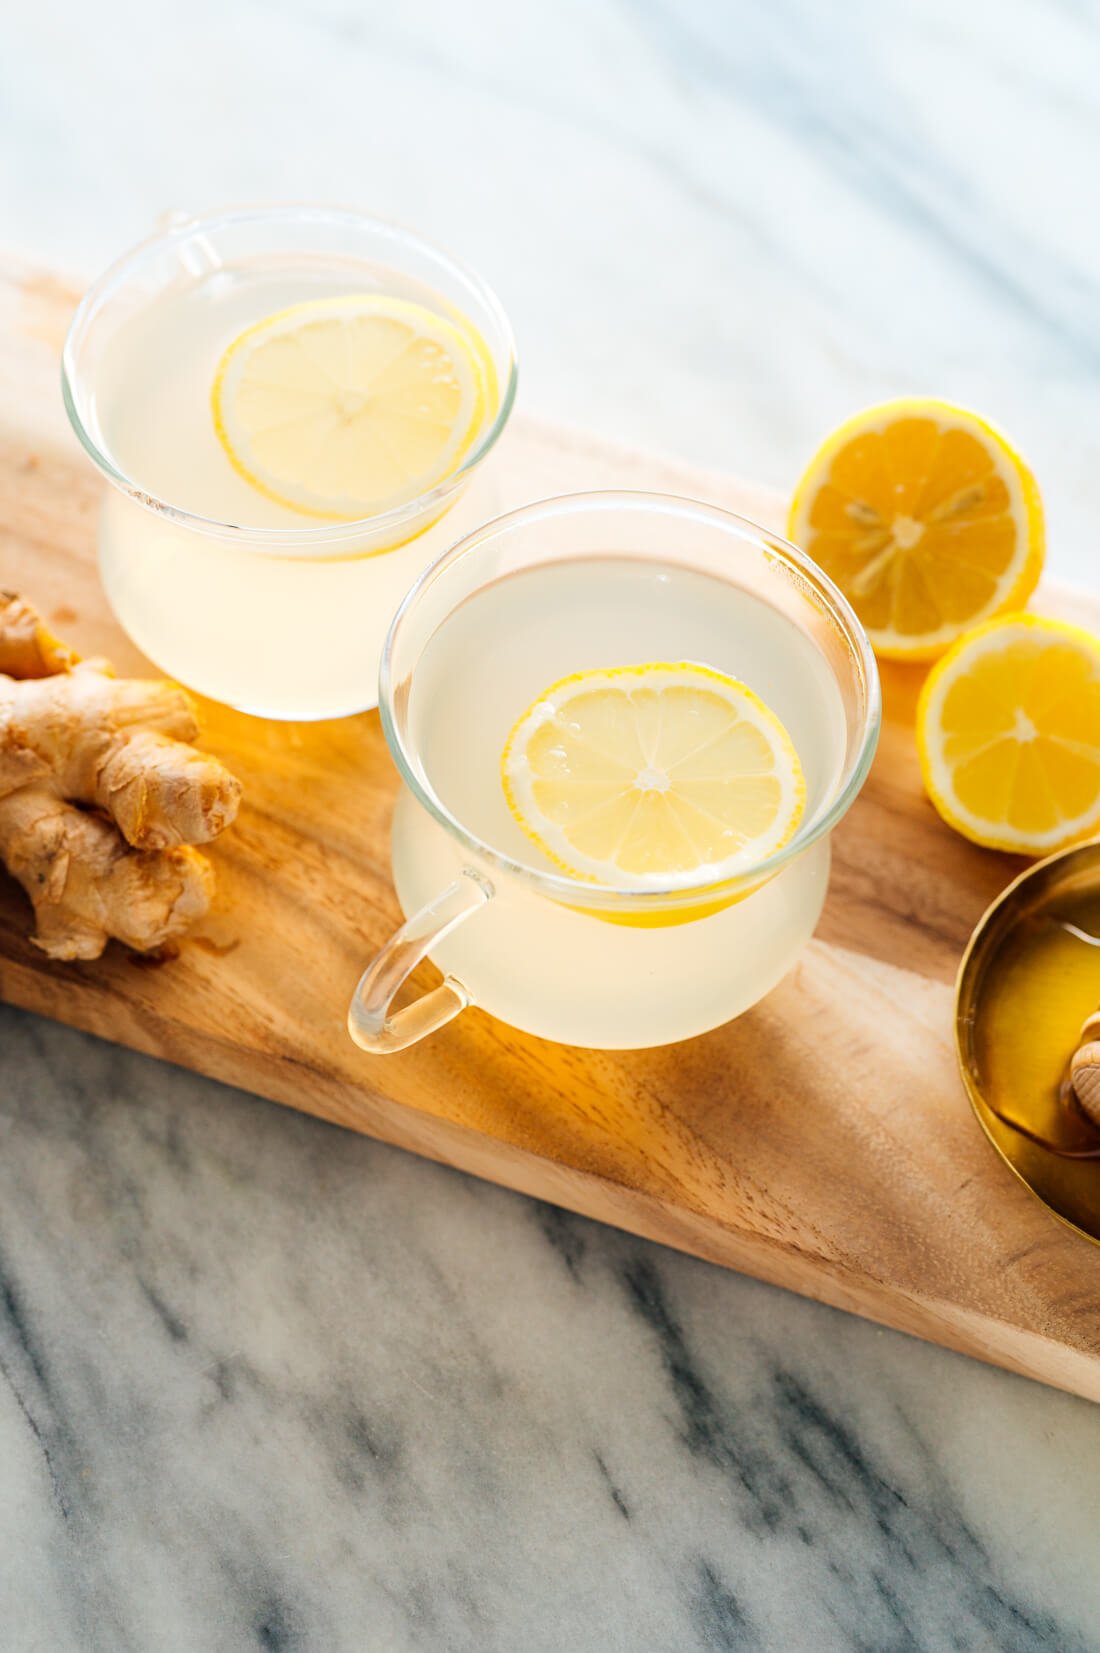 best ginger tea recipe - lemon water-how to take care of your voice